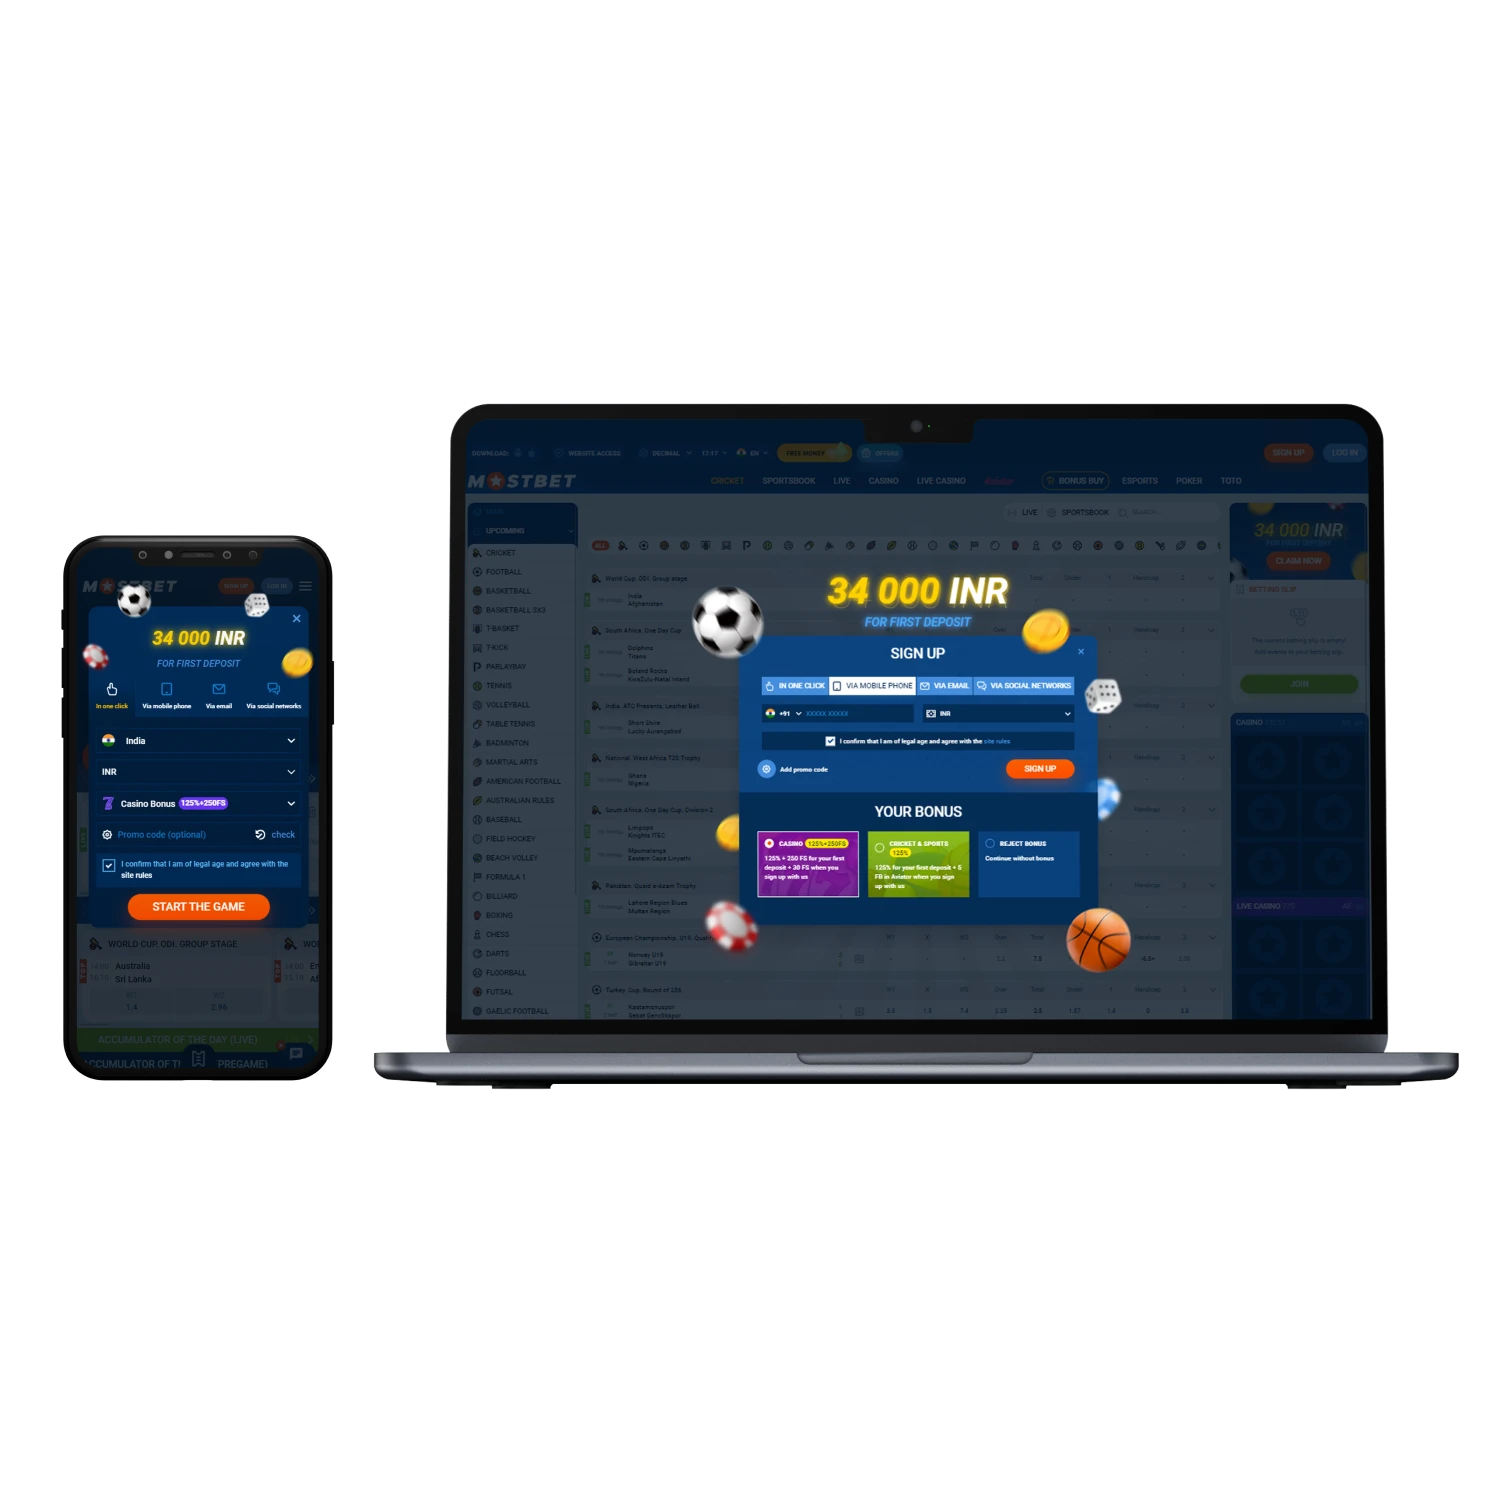 Register and verify your new account Mostbet in a few minutes on the official site.